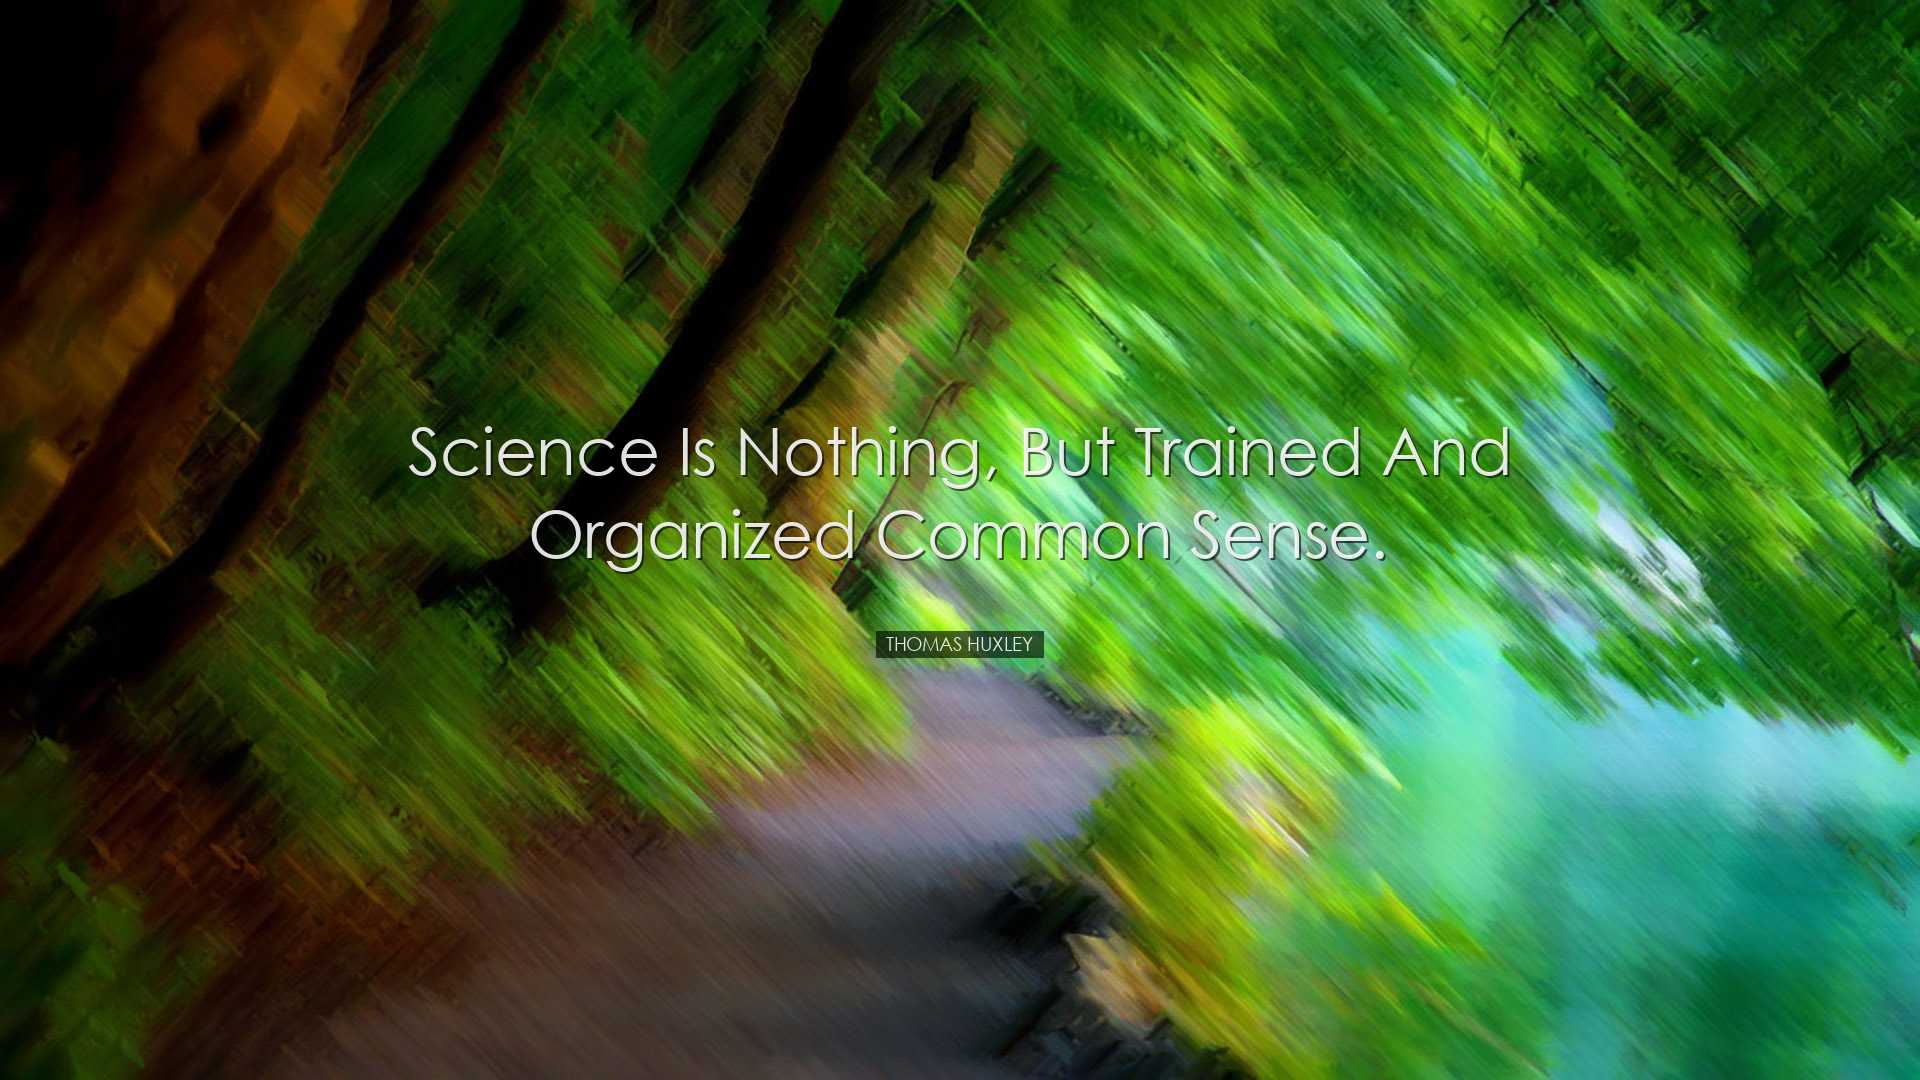 Science is nothing, but trained and organized common sense. - Thom